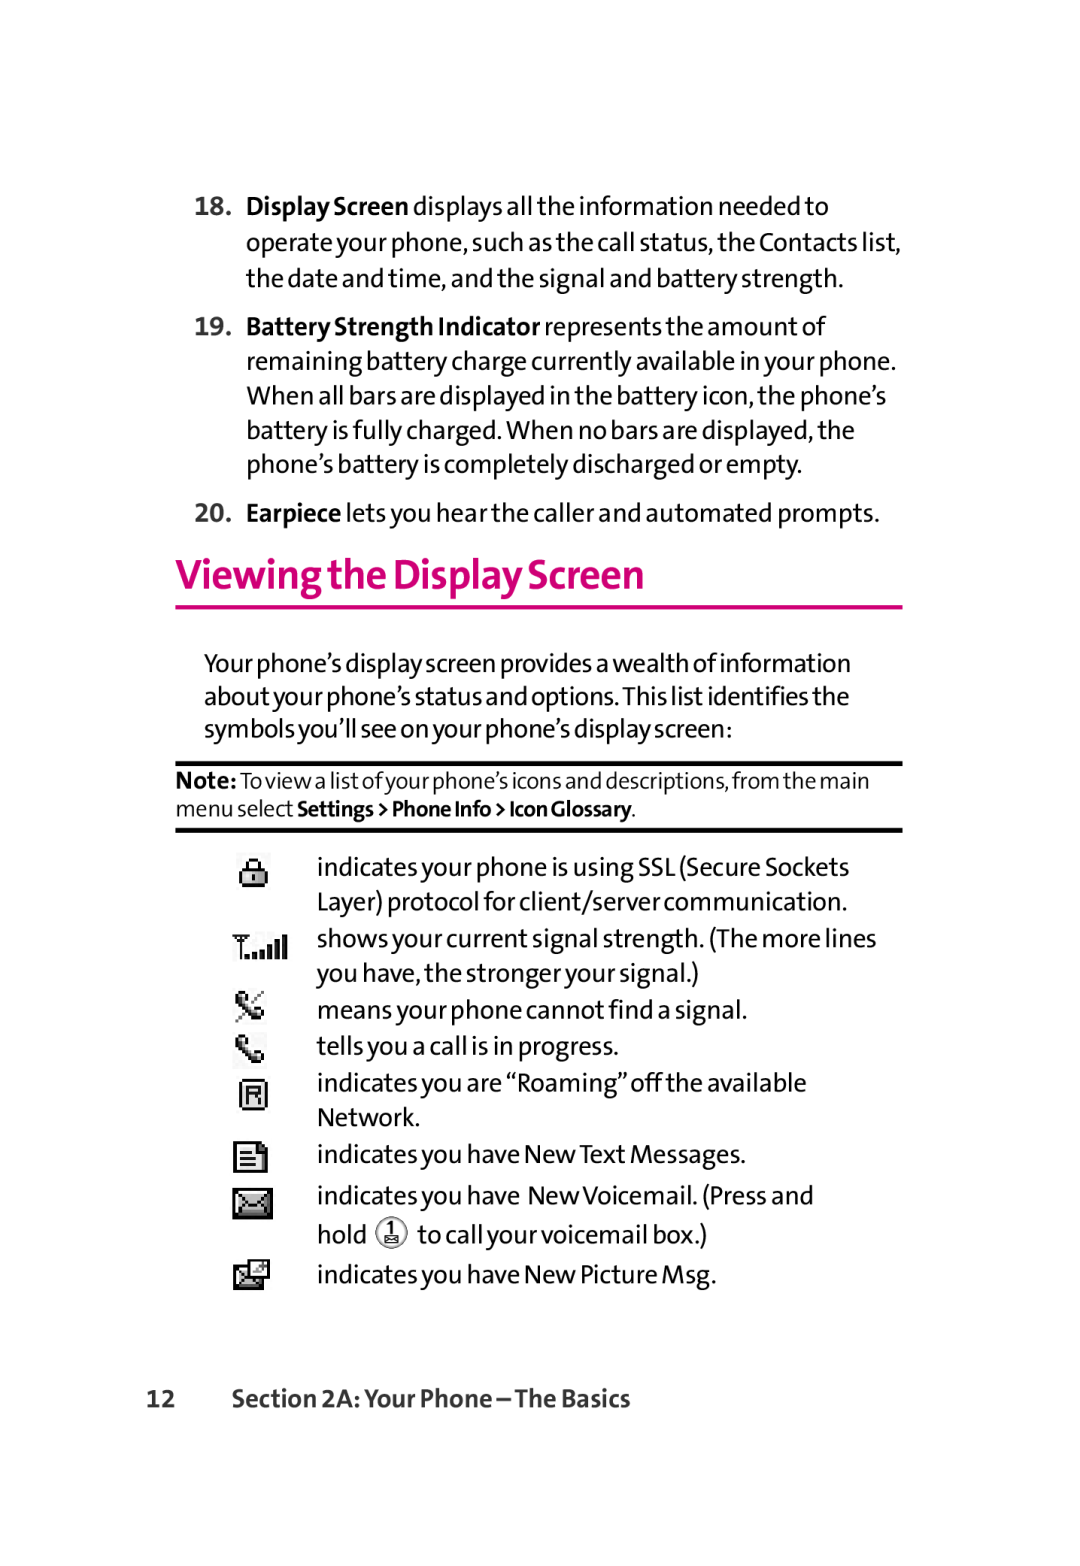 LG Electronics 350 manual Viewing the Display Screen, A Your Phone - The Basics 